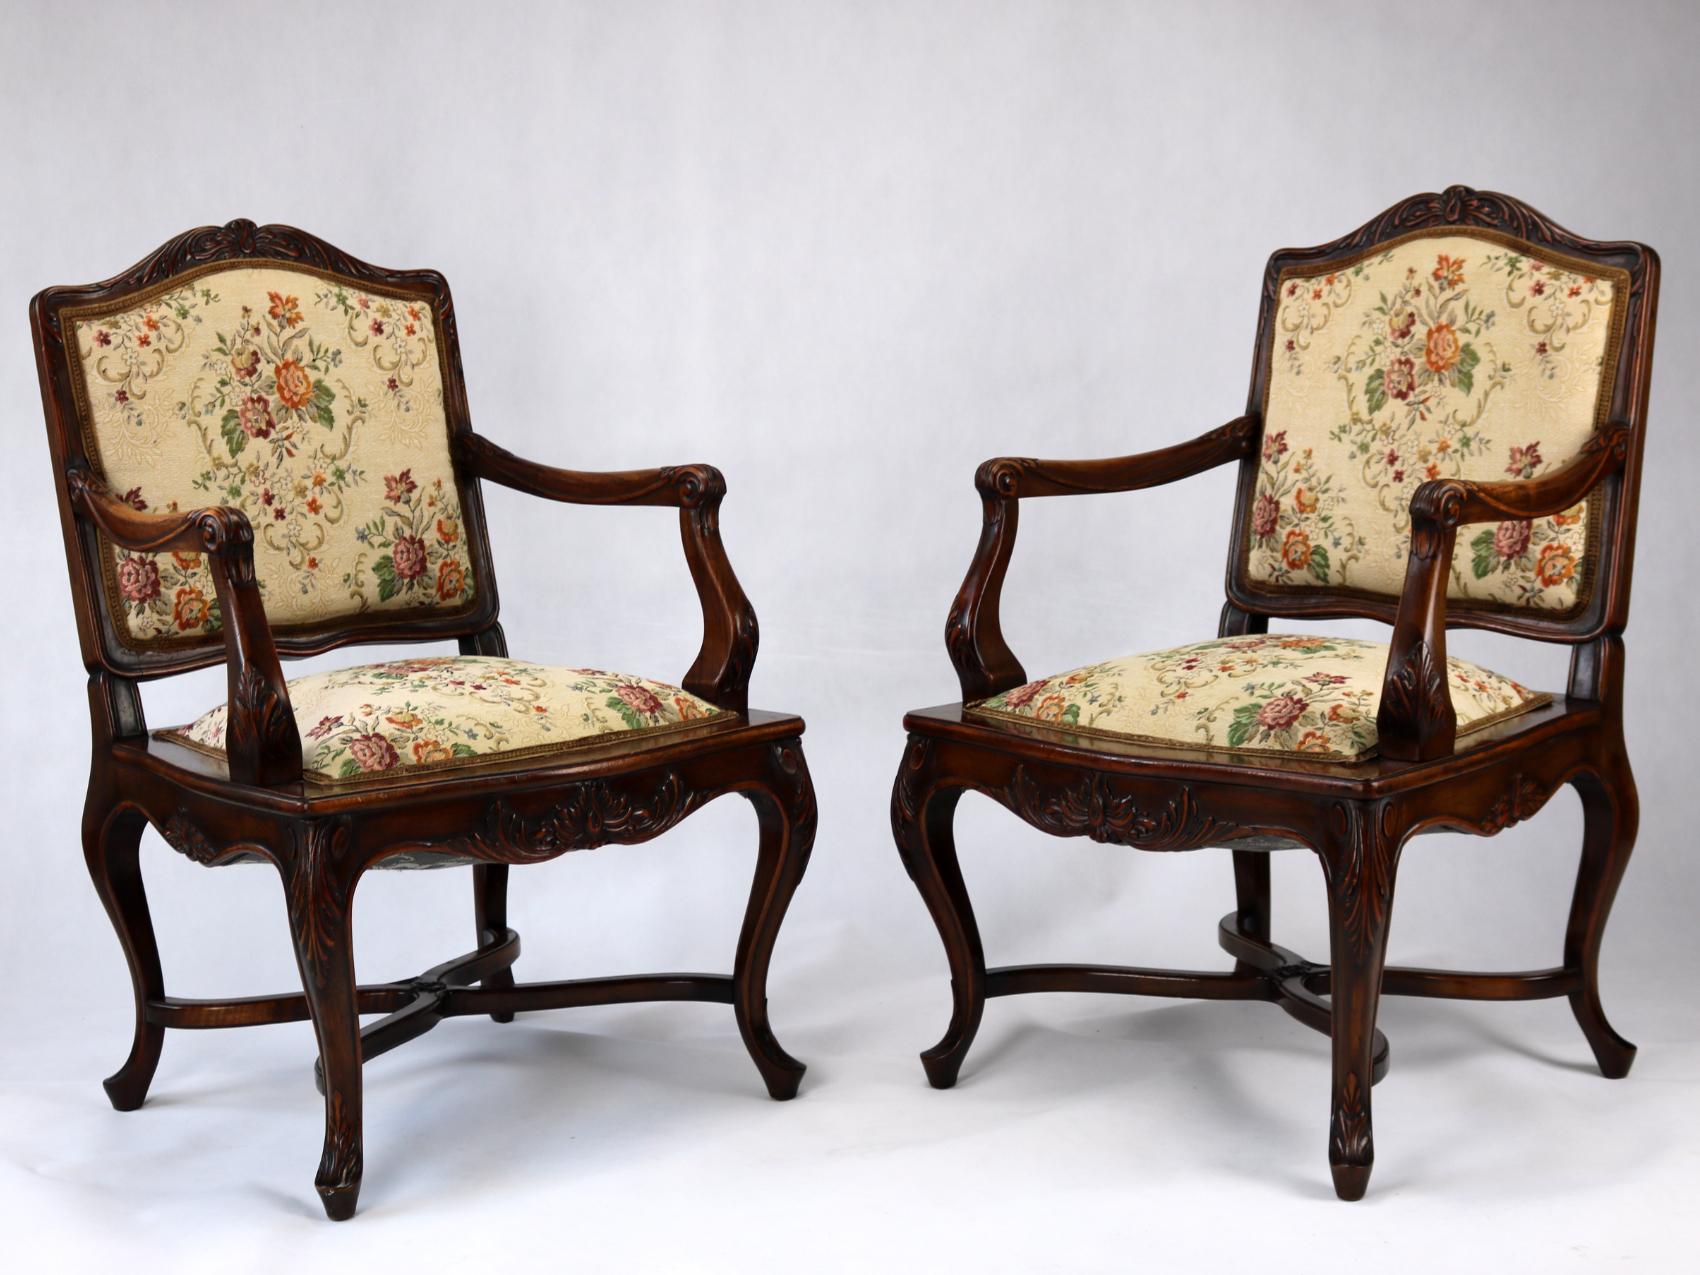 Set of 4 armchairs crafted during the second half of the 19th century during the Rococo Revival, a movement where the traditions of the Rococo period and inspirations of Louis XV furniture heavily influenced furnishings and decorative arts. It shows